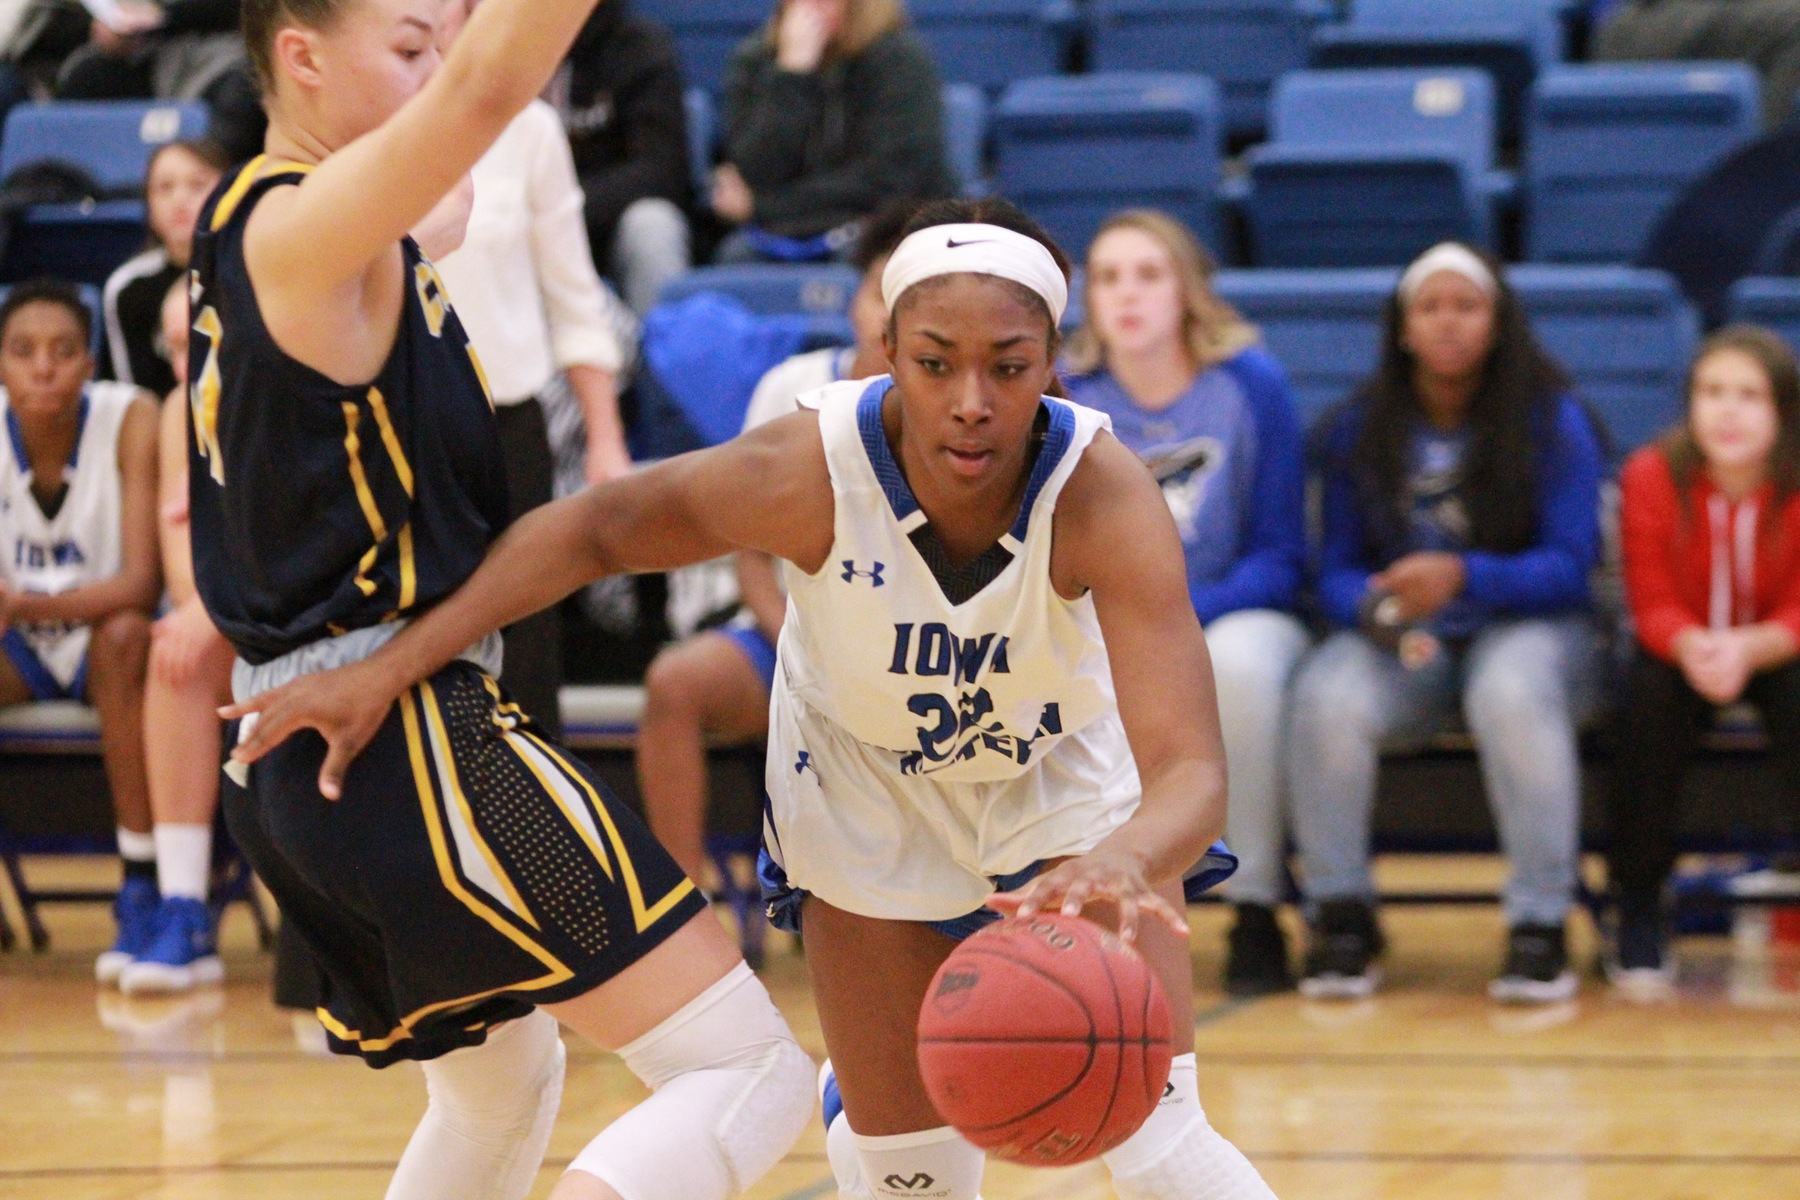 Jazza Johns notched another double-double with 11 points and 10 rebounds in the win over Little Priest Tribal College.